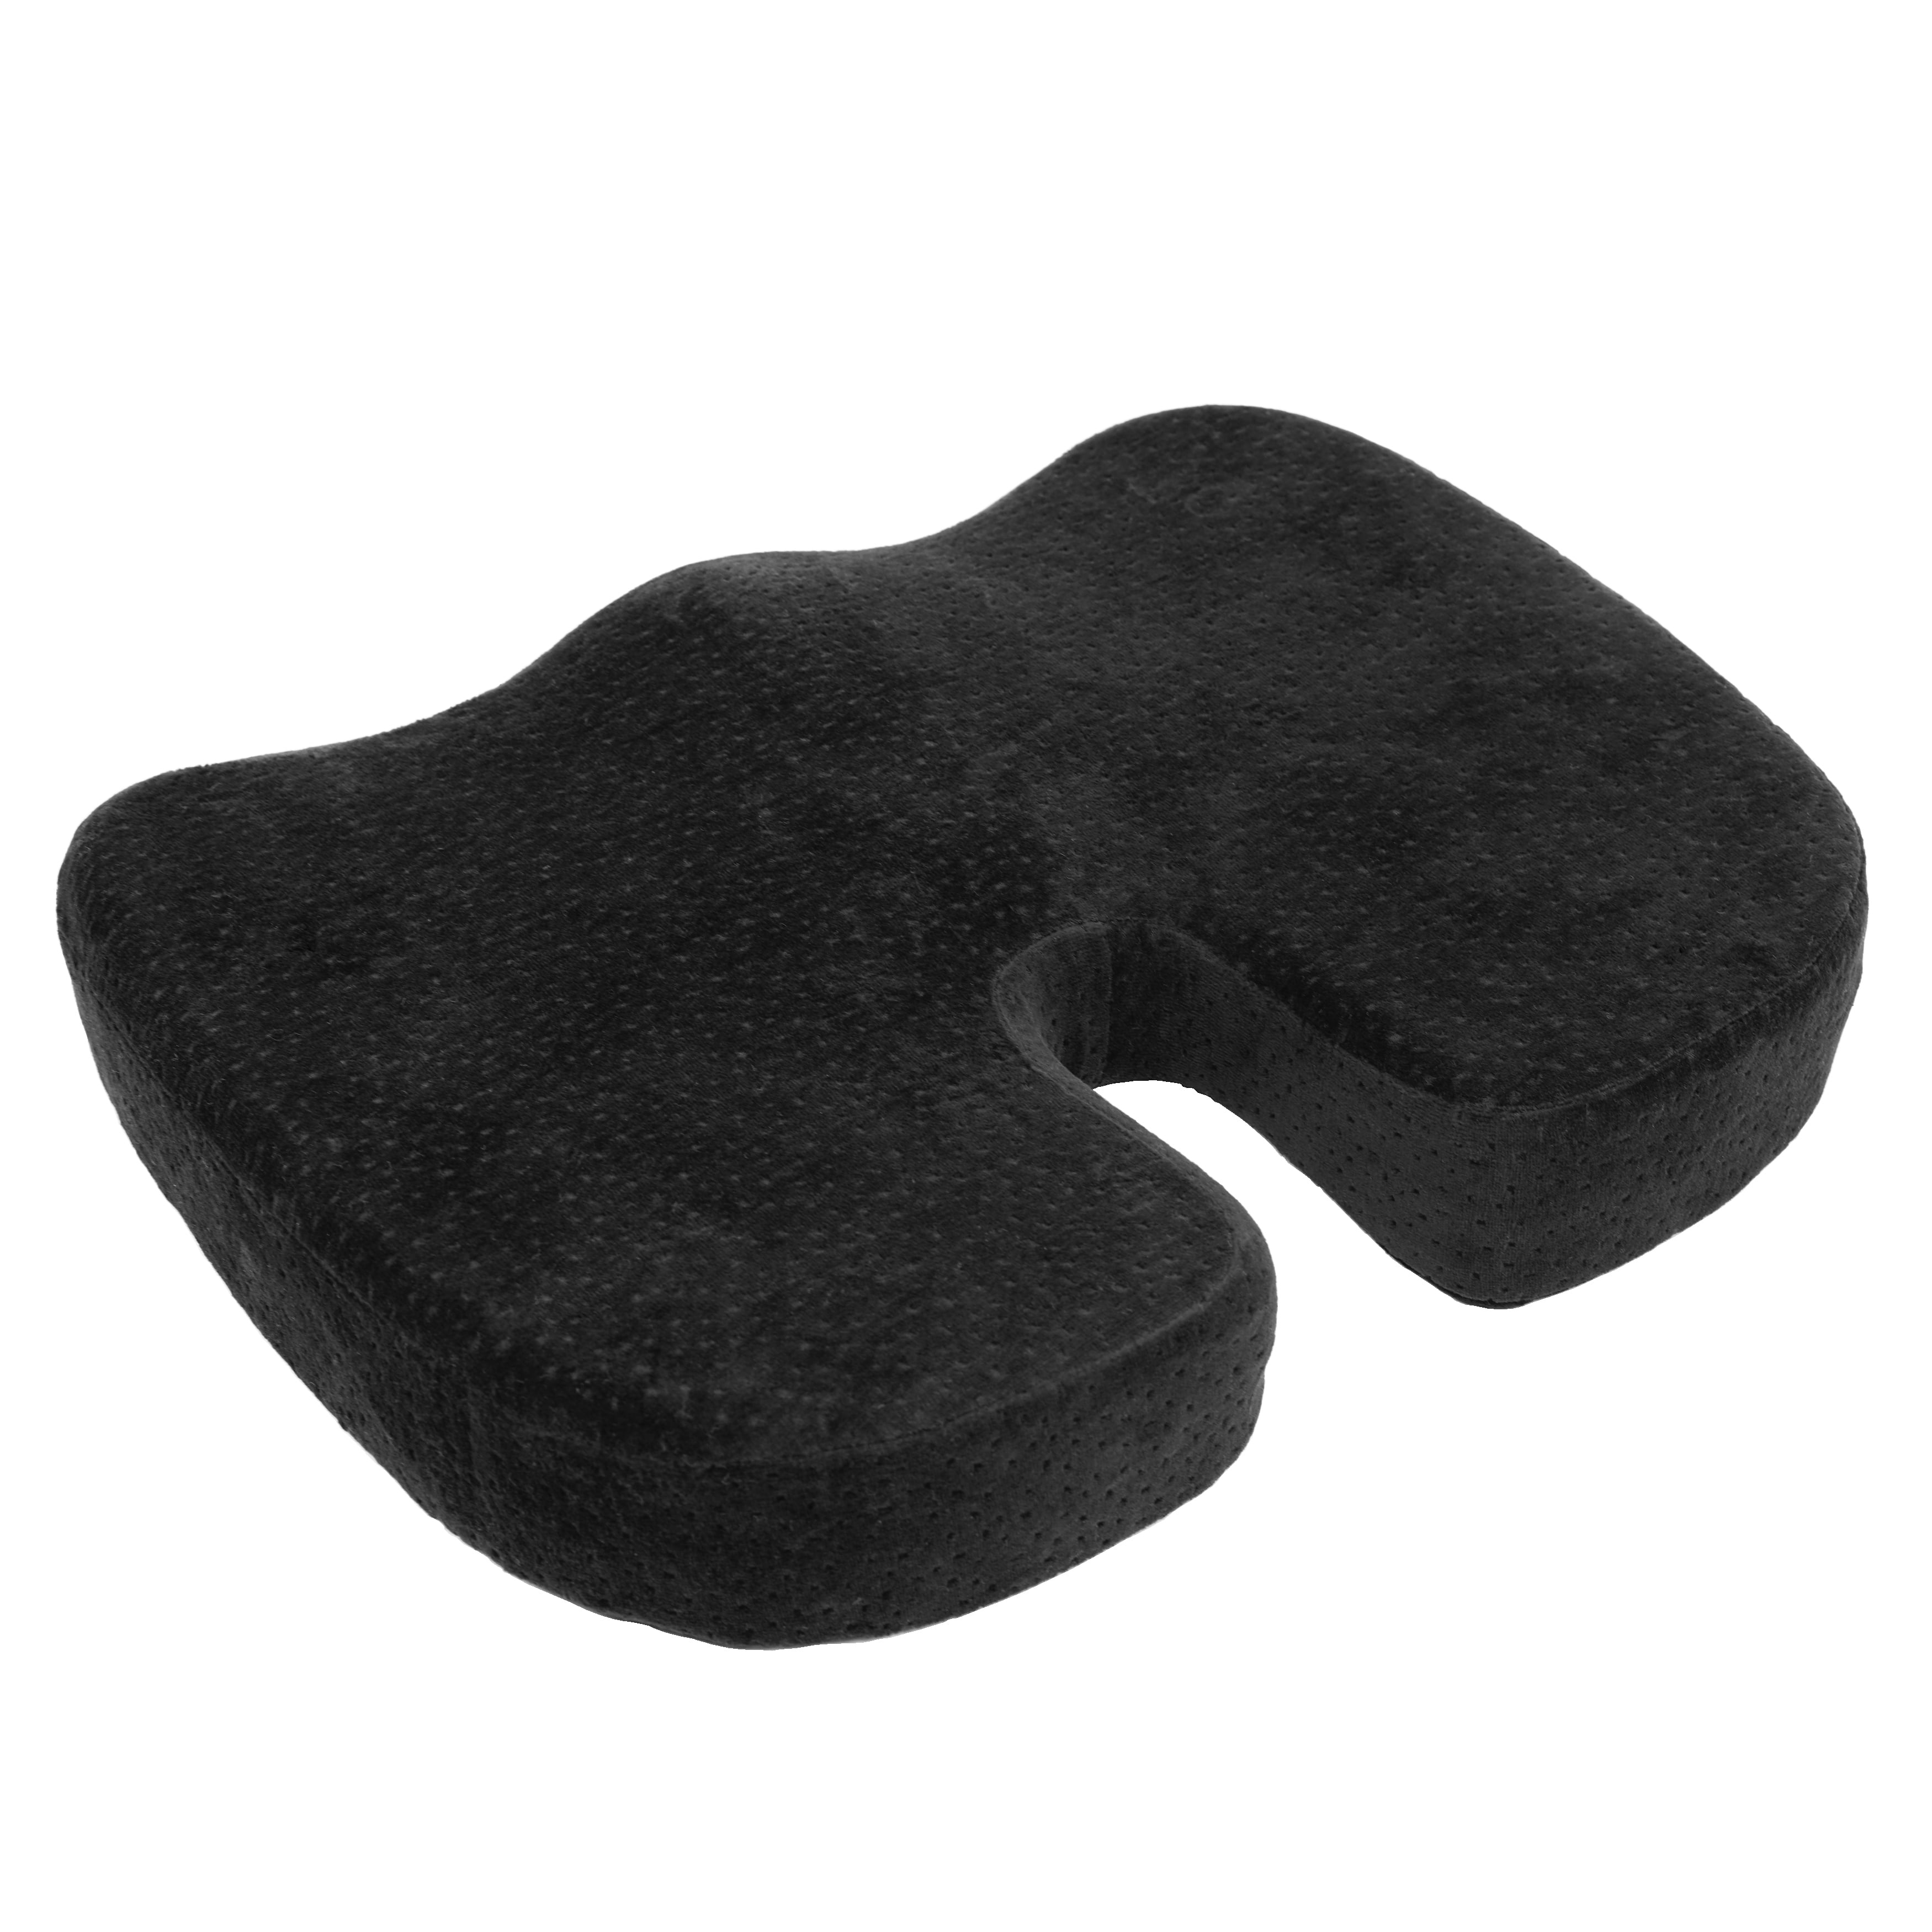 Picture of Aurora Health & Beauty AW203 Black Orthopedically Back Designed Memory Foam Coccyx Cushion Seat